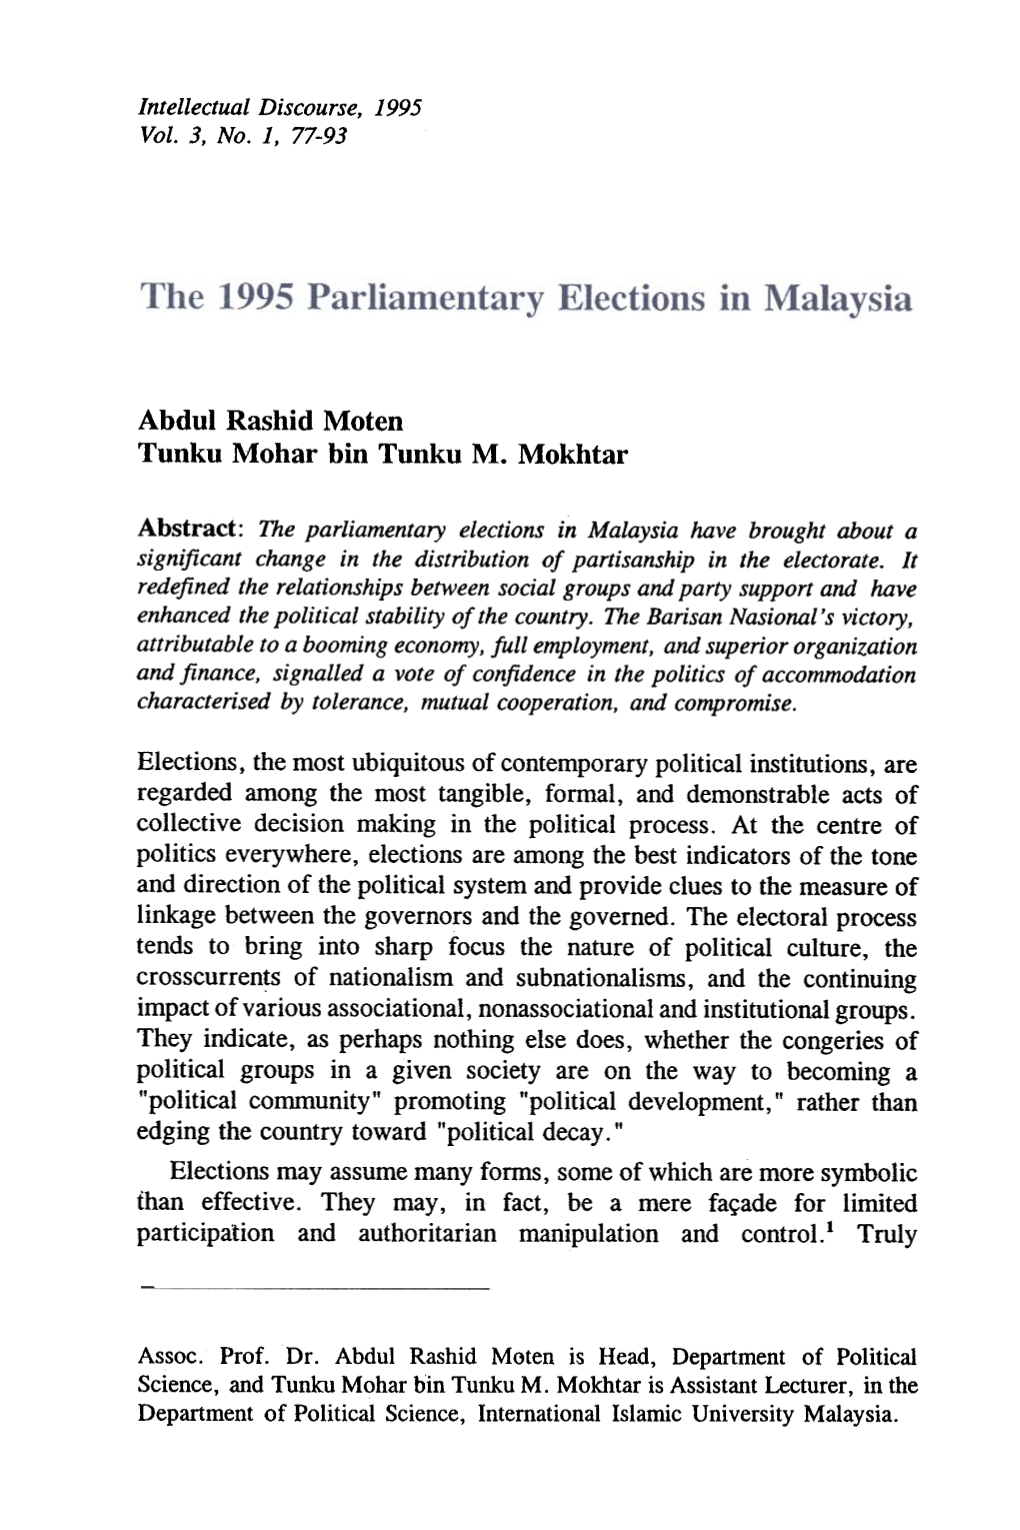 The 1995 PARLIAMENTARY ELECTIONS in MALAYSIA [81] State and the Distribution Pattern of the Population May Account for This Disparity